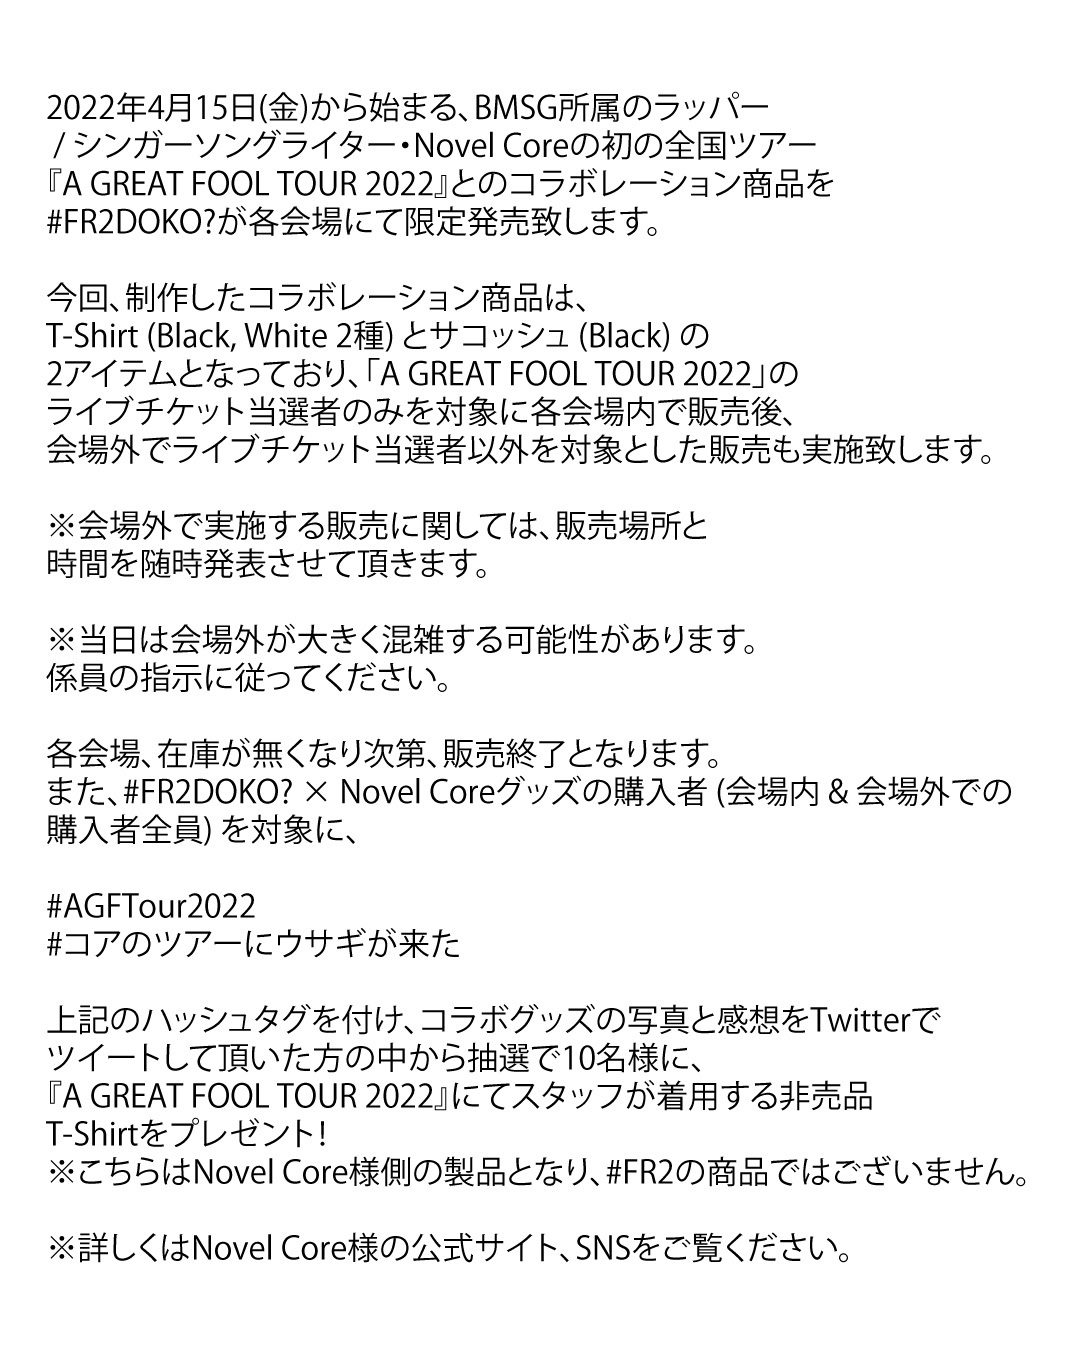 Novel Core初の全国ツアー『A GREAT FOOL TOUR 2022』と#FR2DOKO?の ...